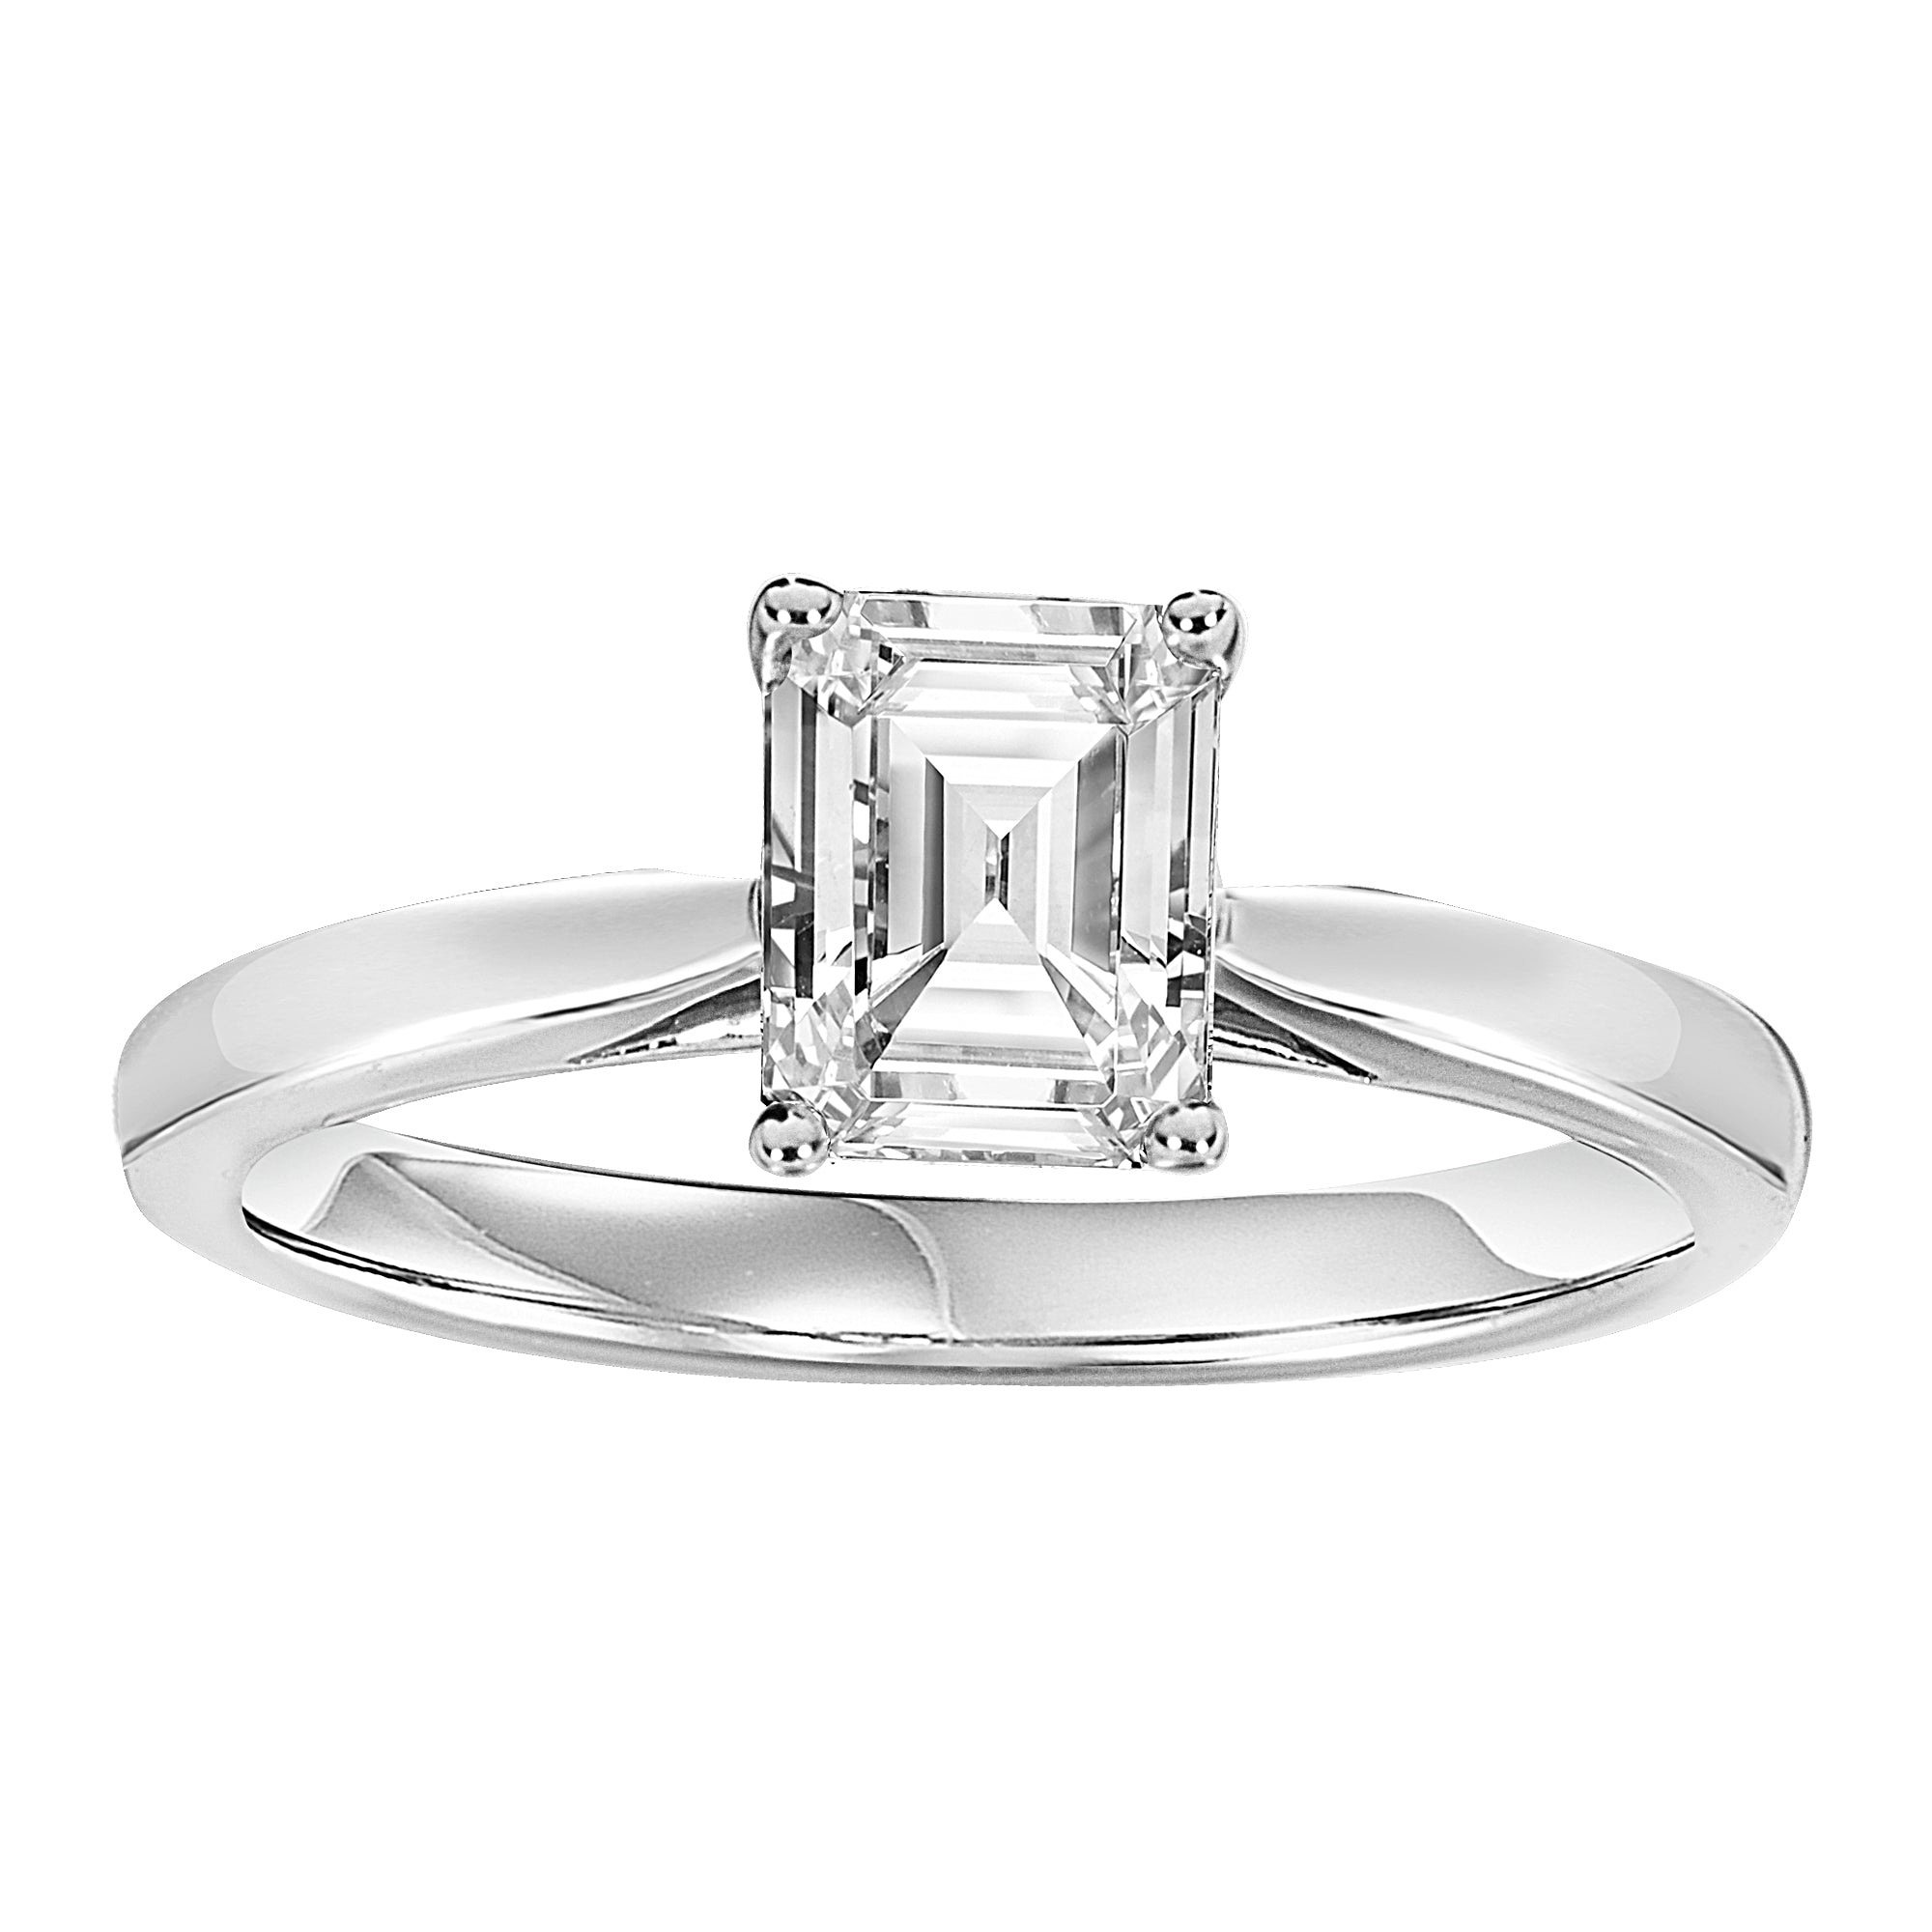 Sterling Silver Cubic Zirconia 1.00ct Ring - AK1021 - Hallmark Jewellers Formby & The Jewellers Bench Widnes